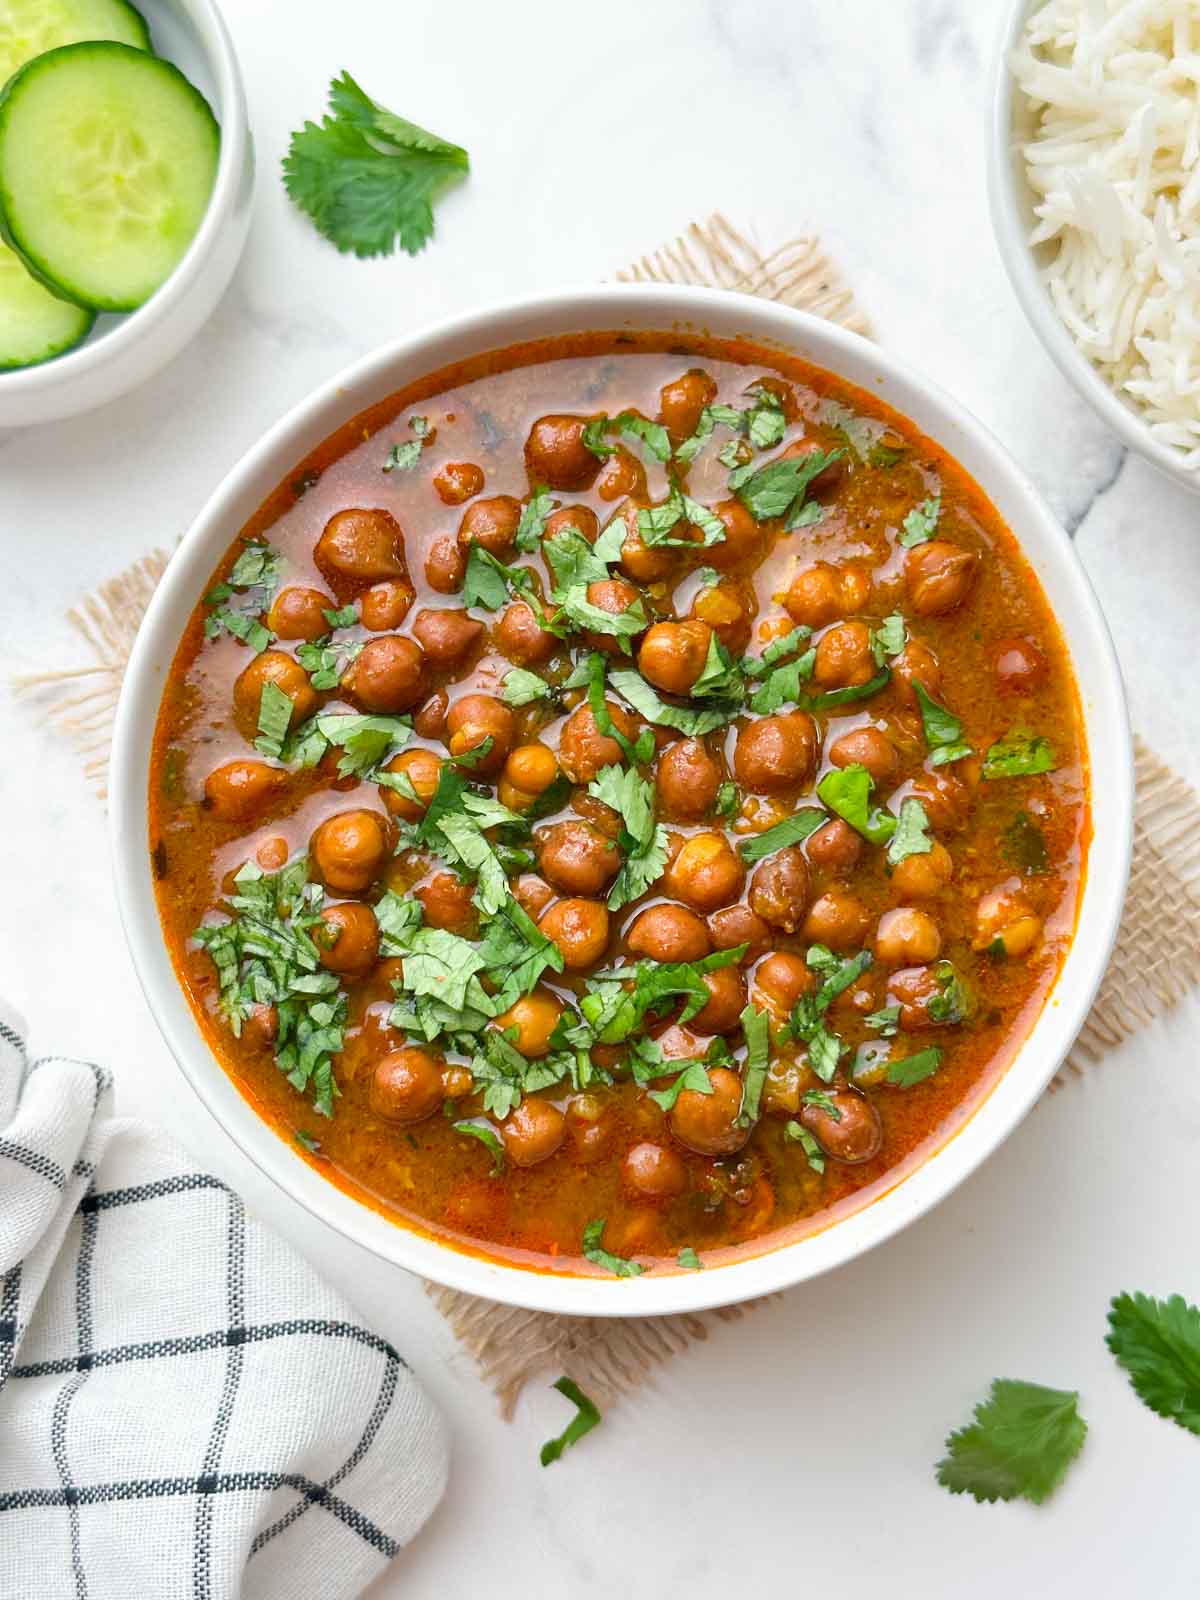 black chickpeas curry (punjabi kala chana) served in a bowl garnish with coriander leaves and spoon in the bowl with cucumber and jeera rice on the side